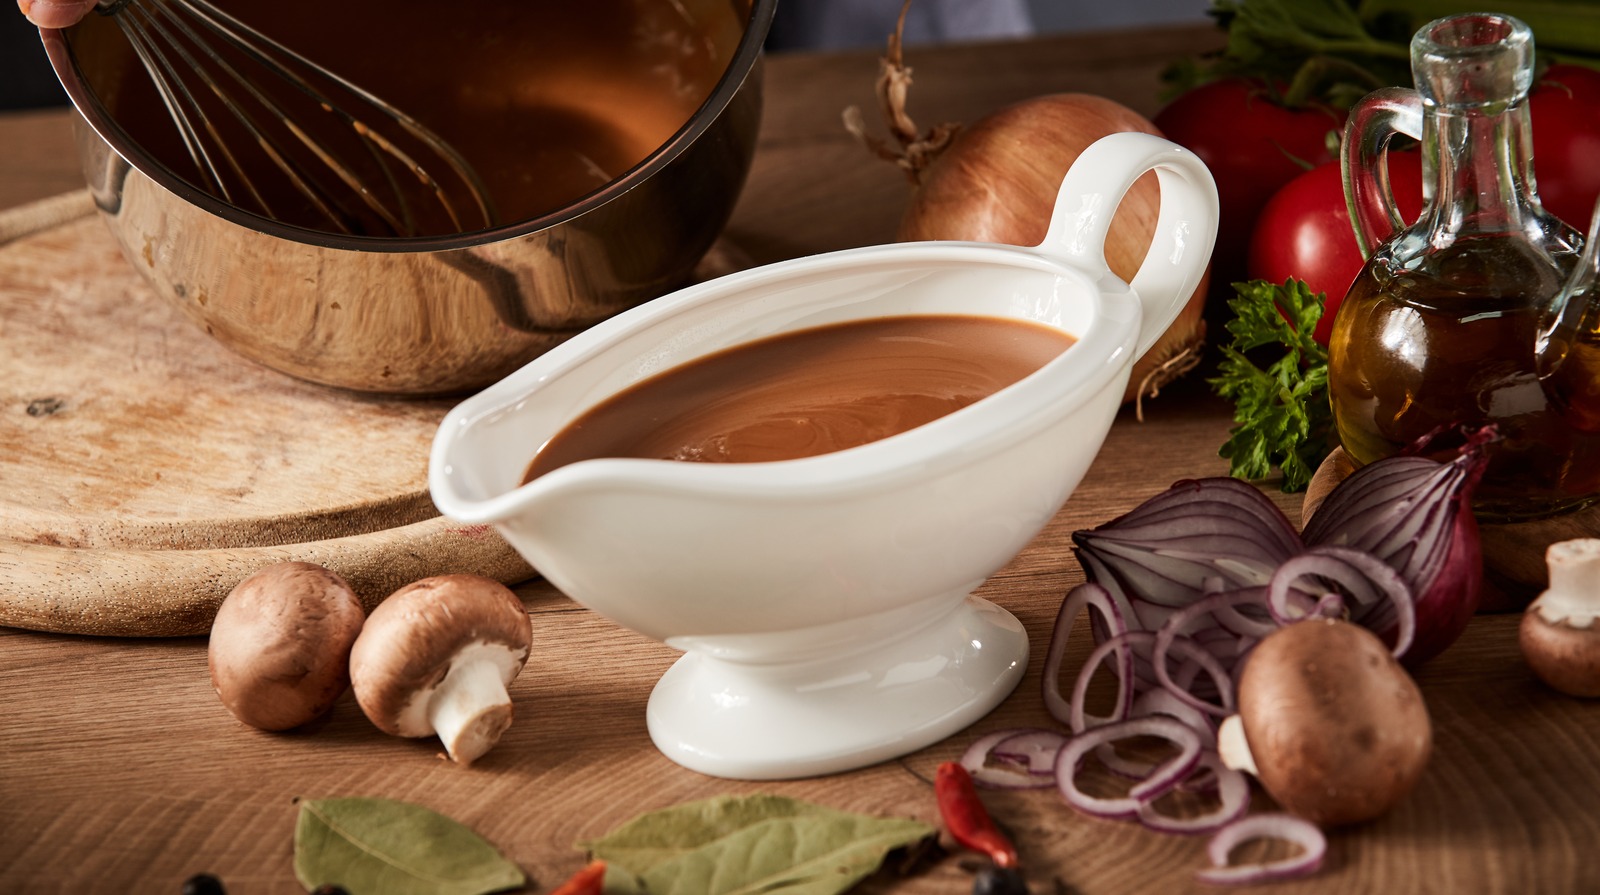 8 Best Gravy Boats and Sauce Dishes in 2023